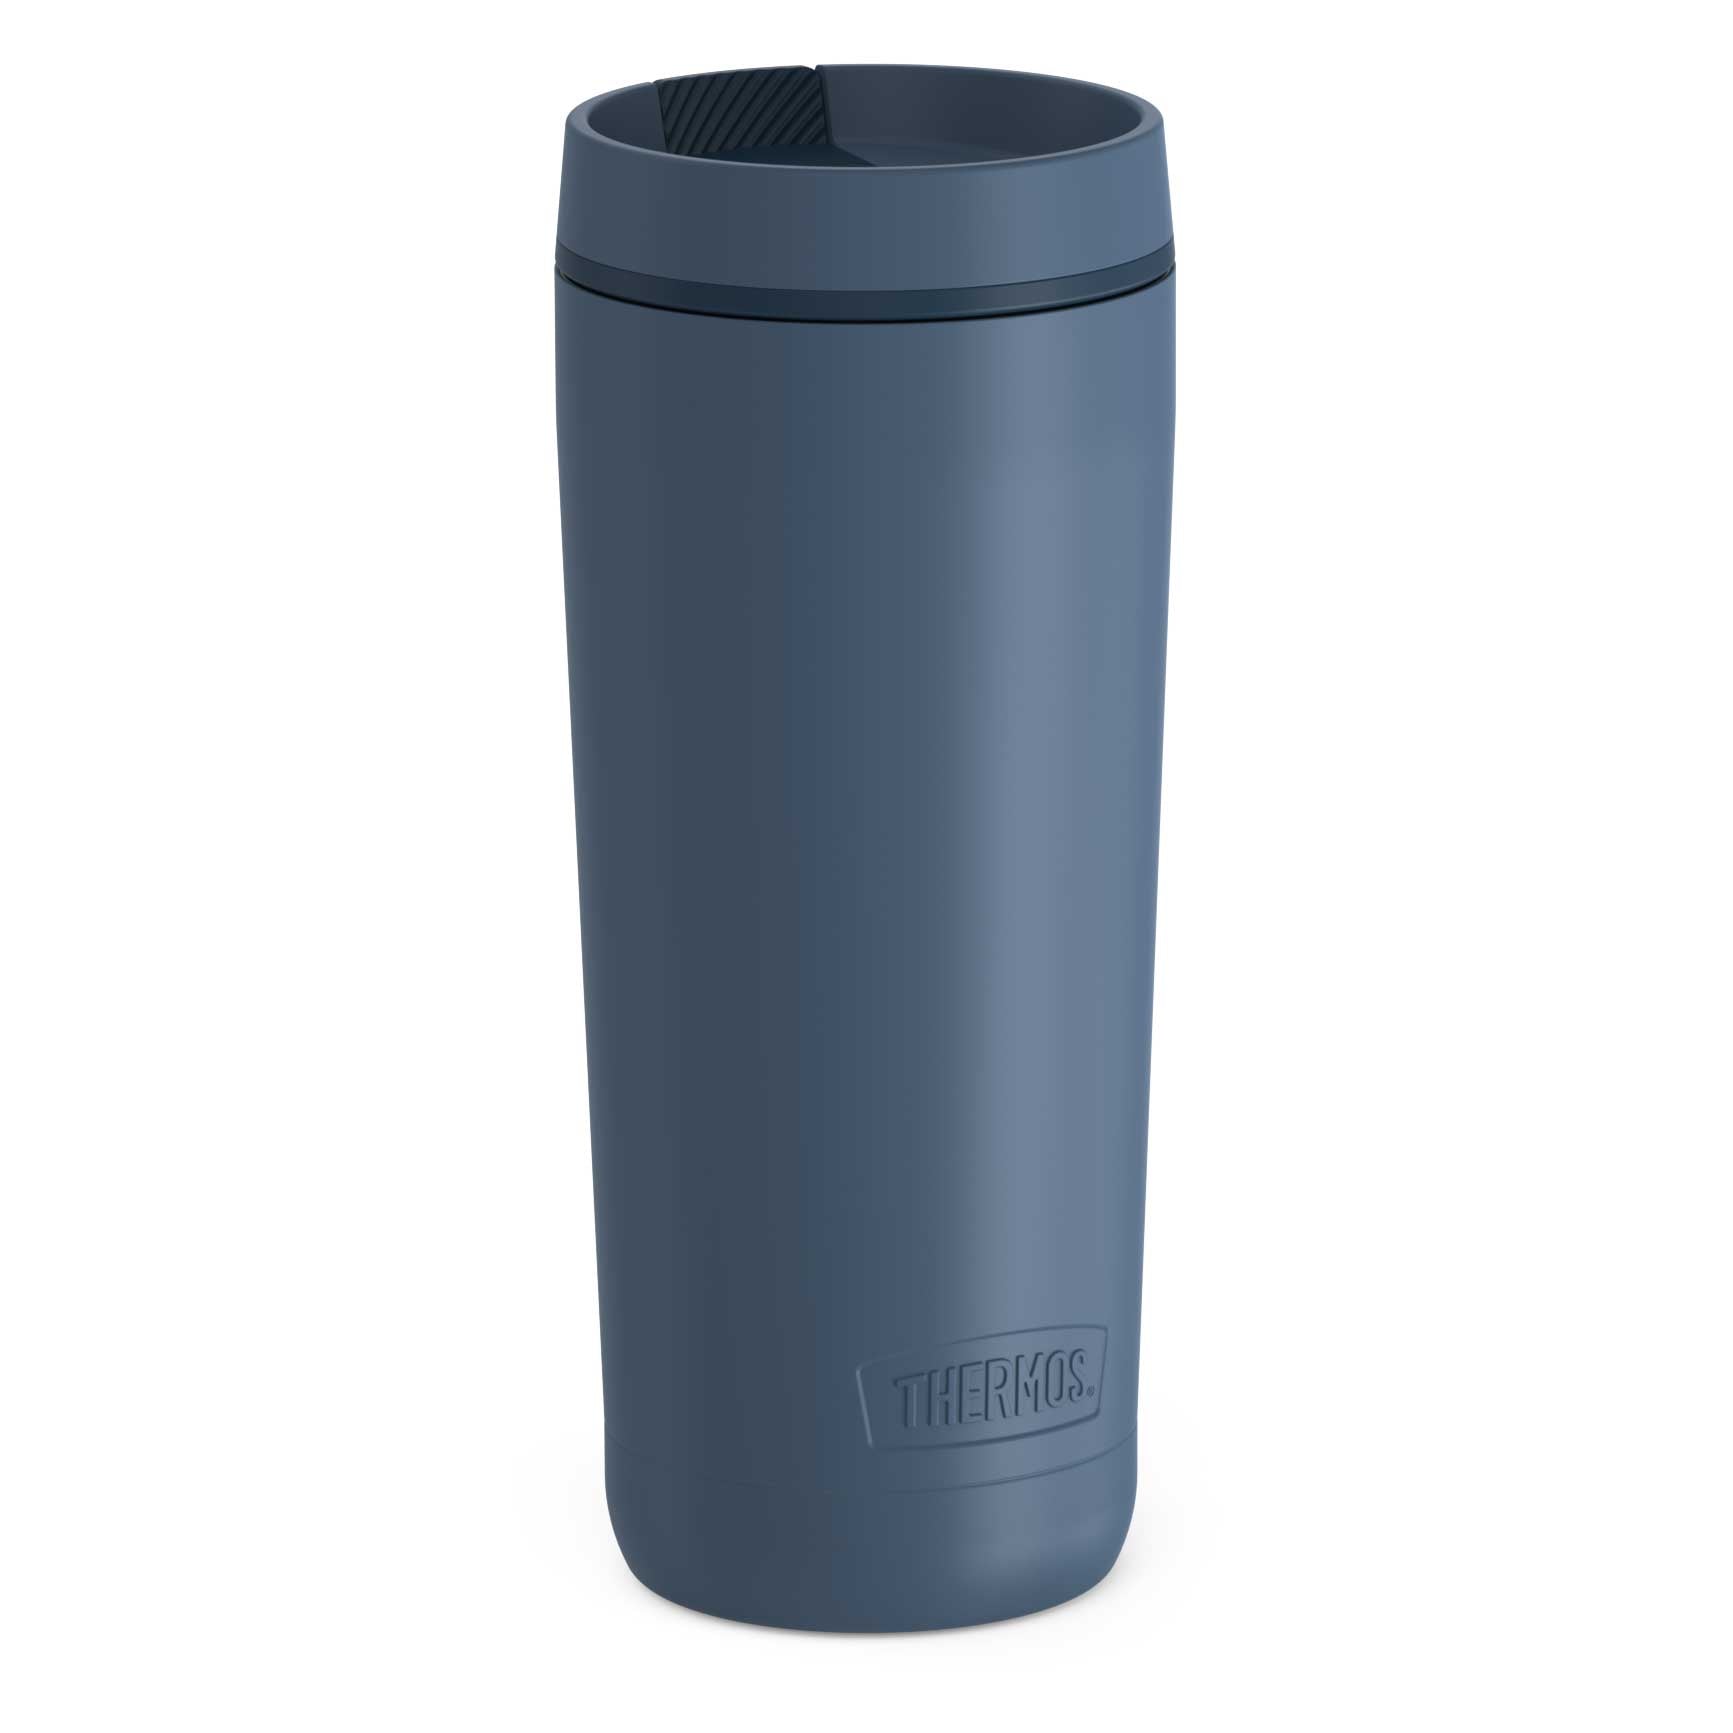 Thermos 18 oz. Vacuum Insulated Stainless Steel Travel Mug